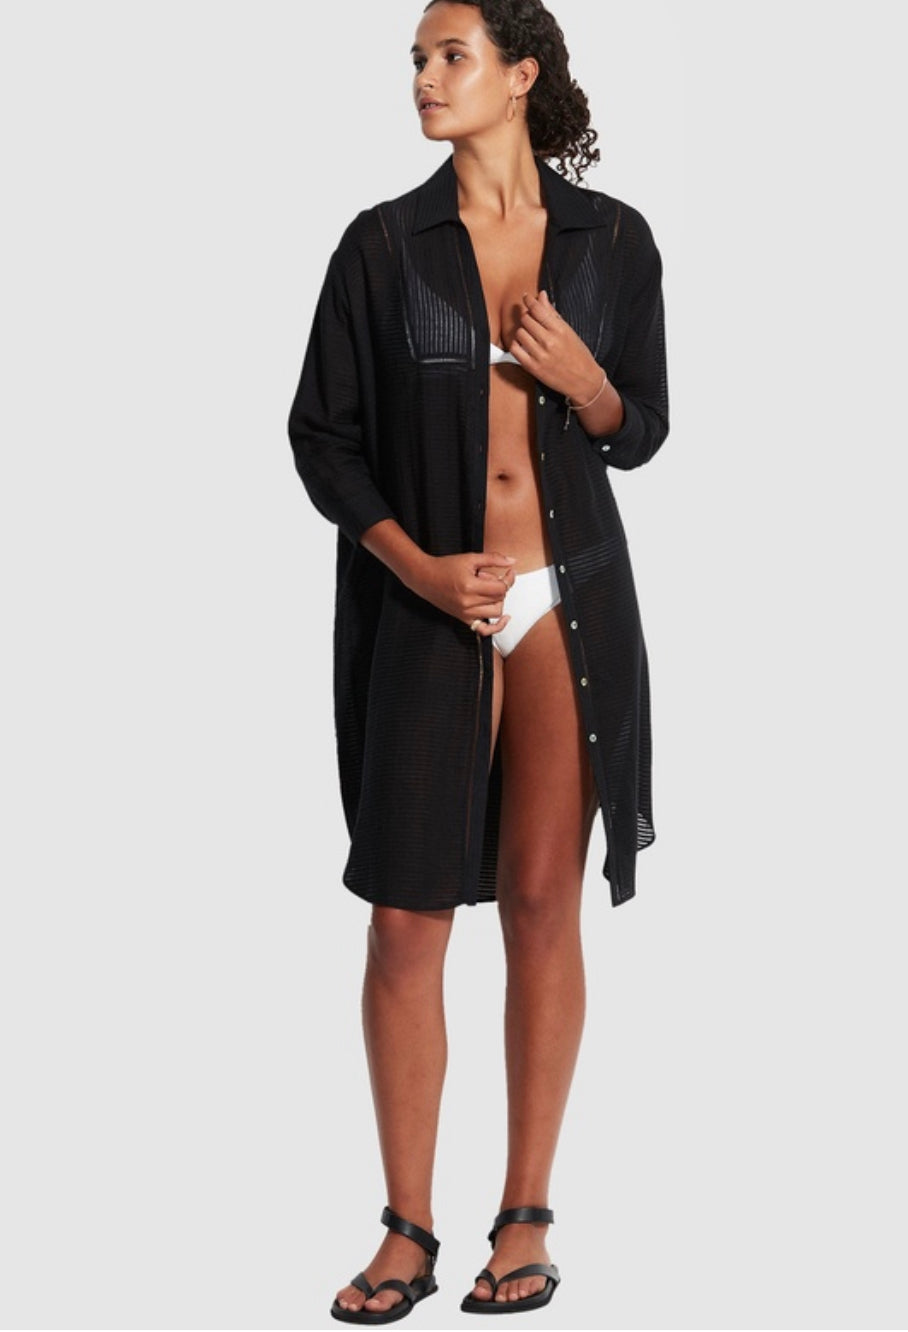 Seafolly Longshore Cover Up Black